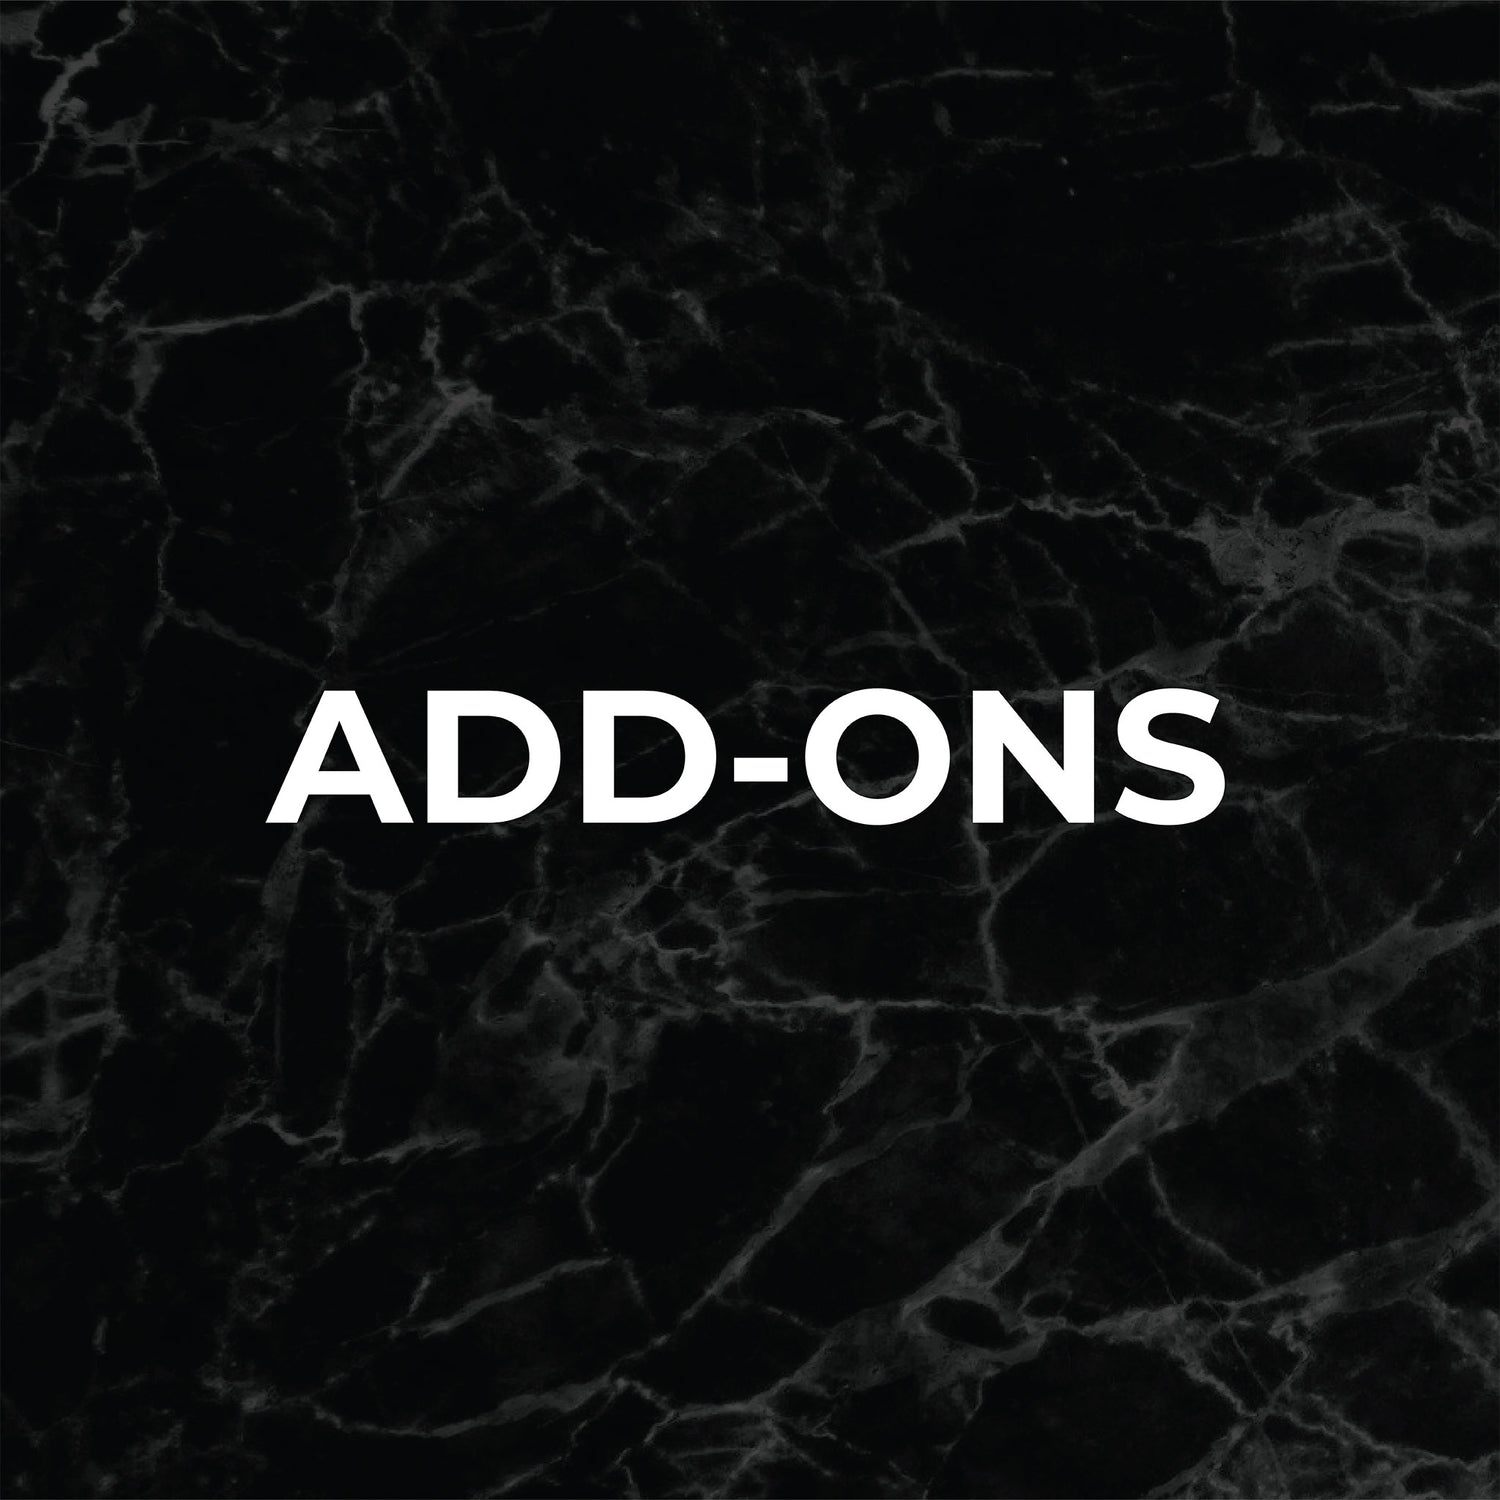 Add-Ons